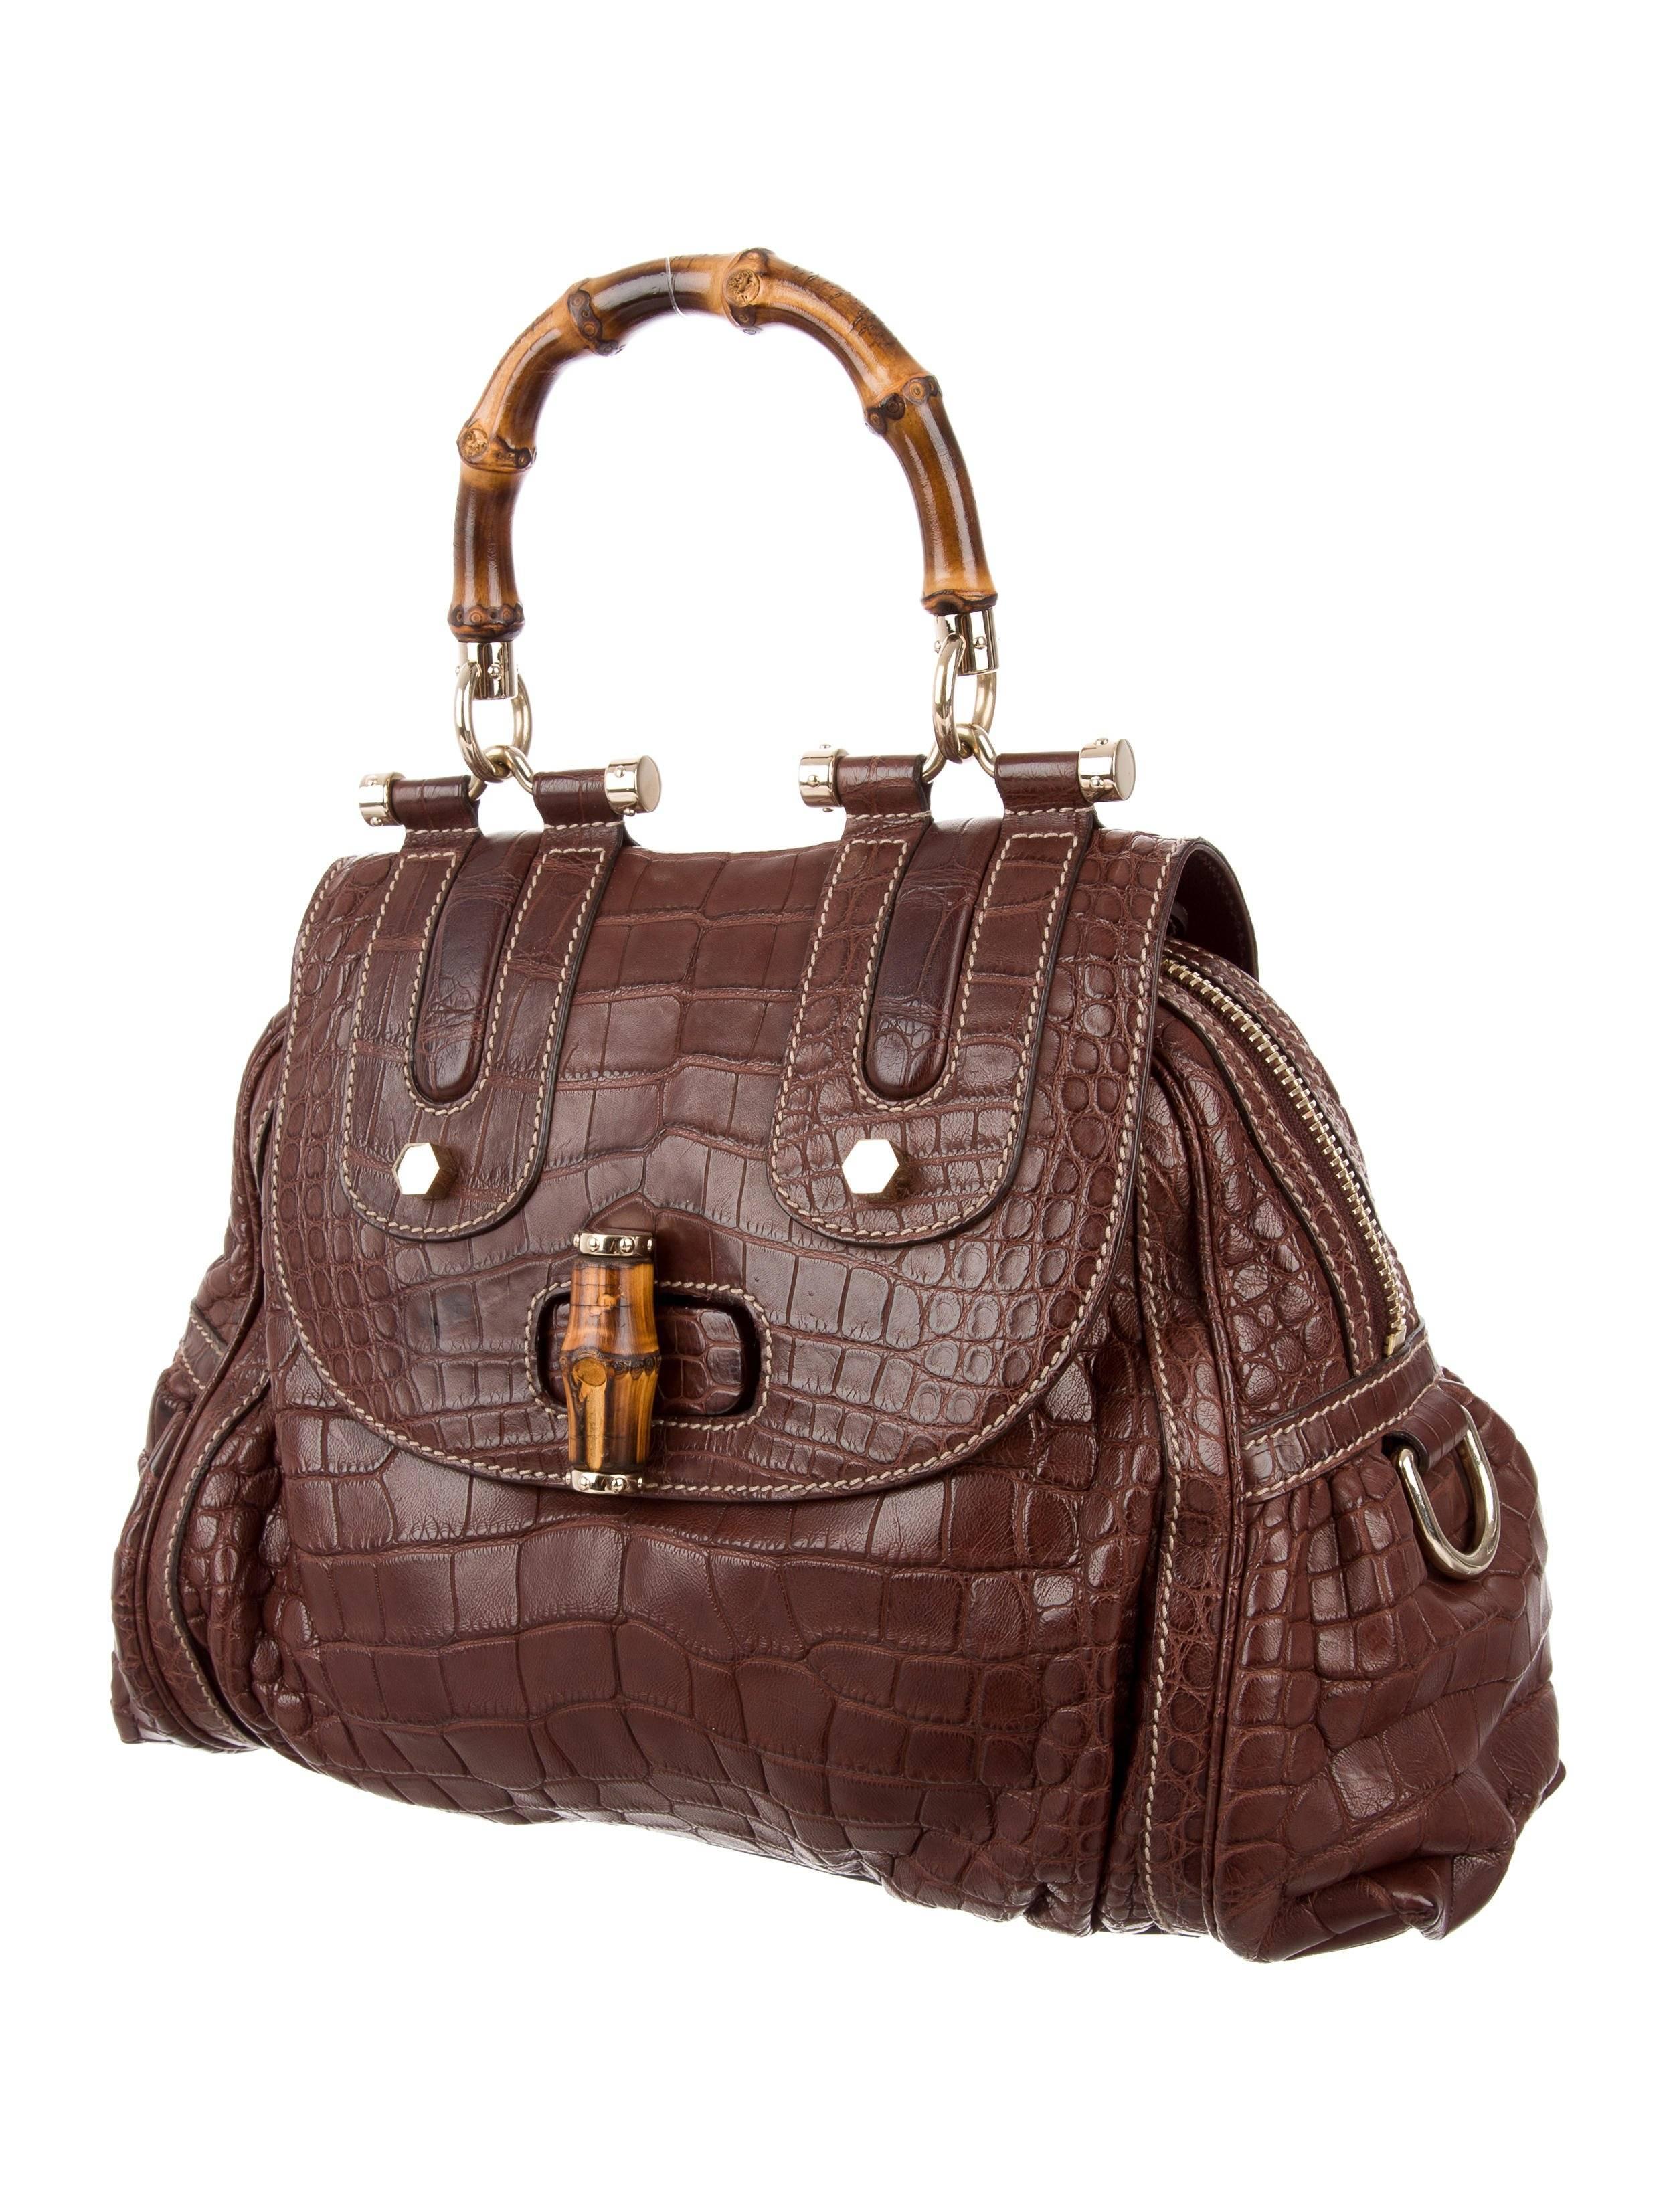 Gucci New Chocolate Crocodile Exotic Skin Kelly Bamboo Top Handle Satchel Bag

Crocodile
Bamboo
Gold tone hardware
Leather lining 
optional shoulder strap
Turn lock closure
Made in Italy
Handle drop 5"
Removable shoulder strap 12"
Measures